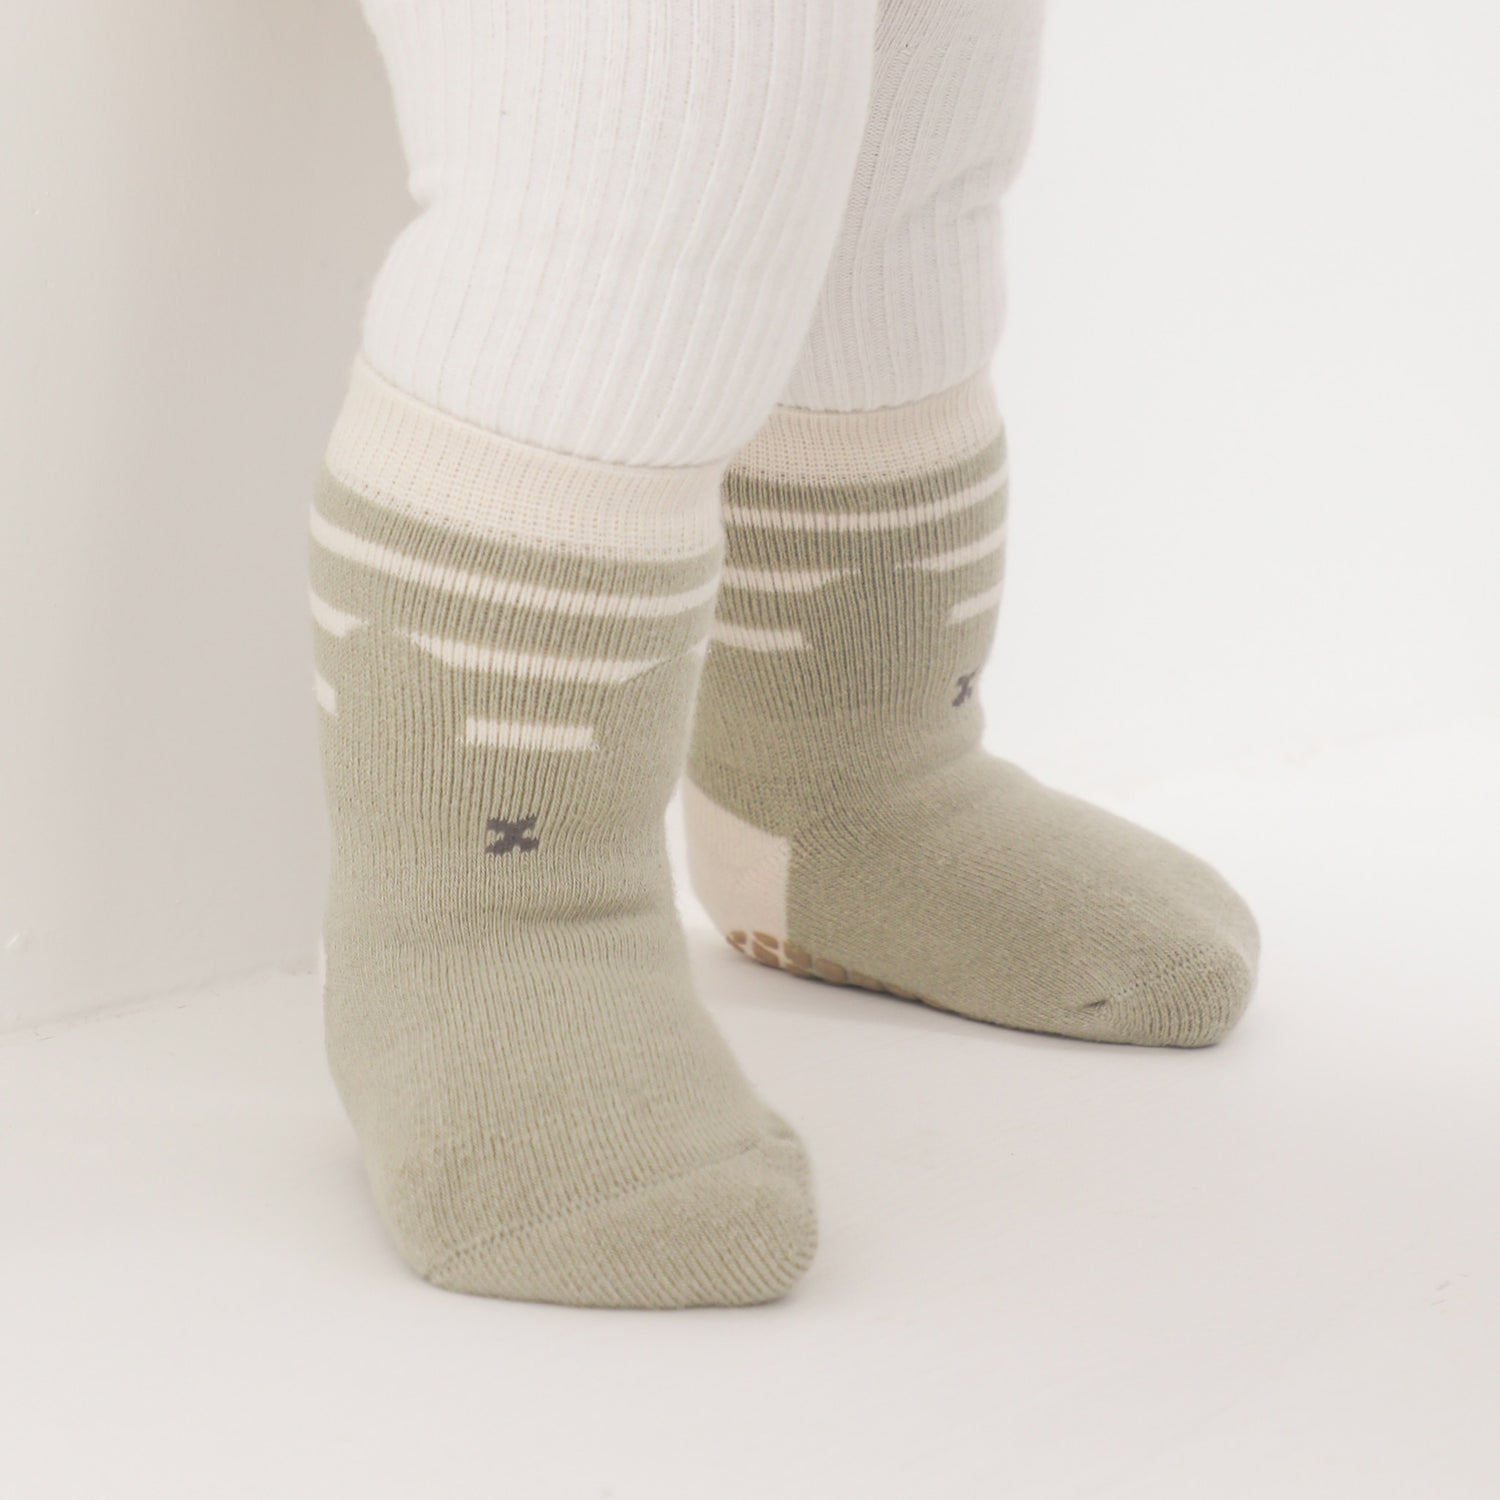 Infant non slip socks with star and moon designs